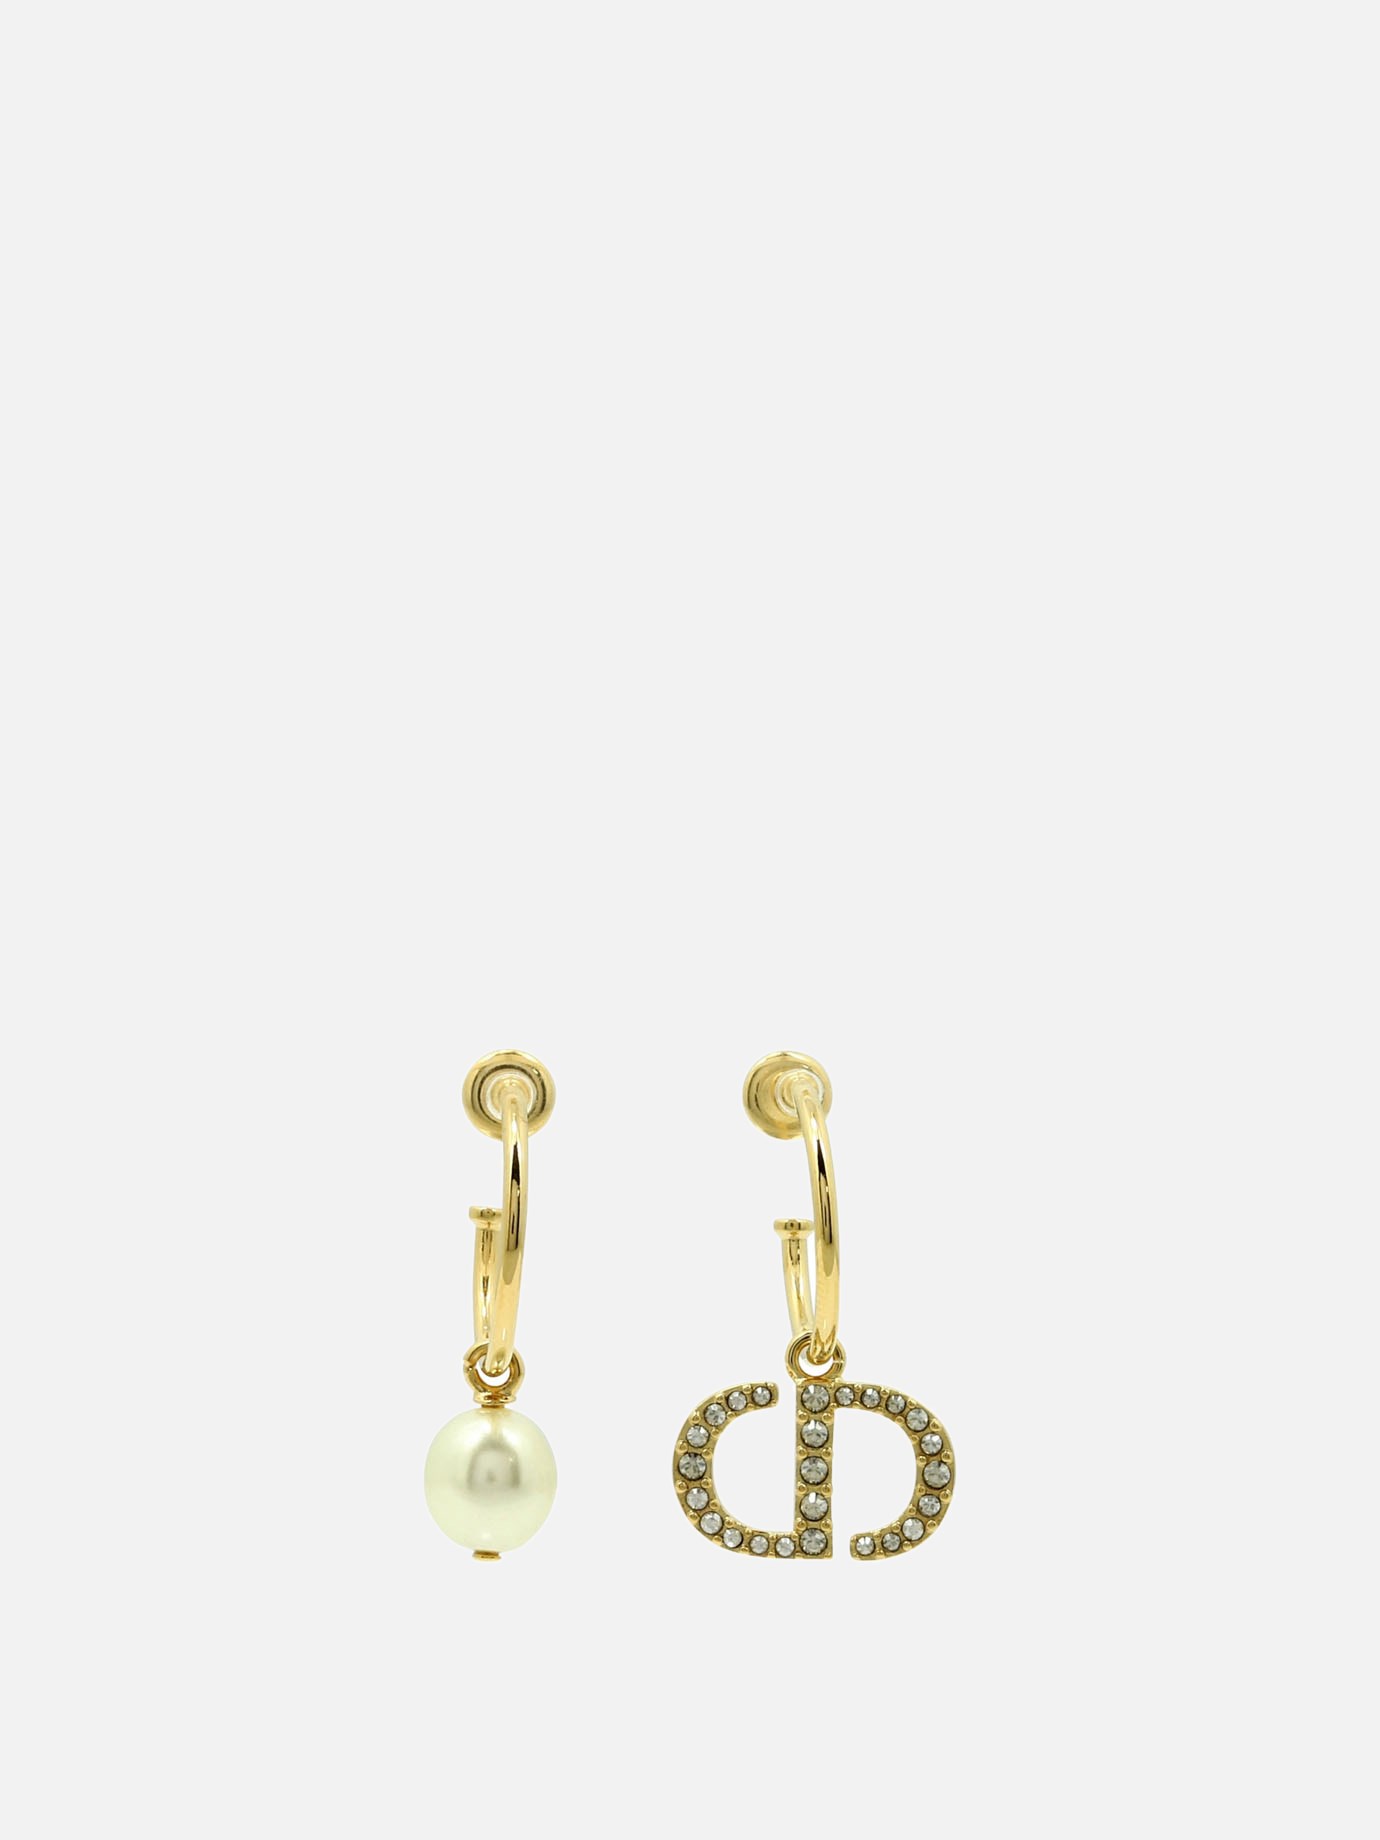  CD and Star Hoops  earrings by Dior